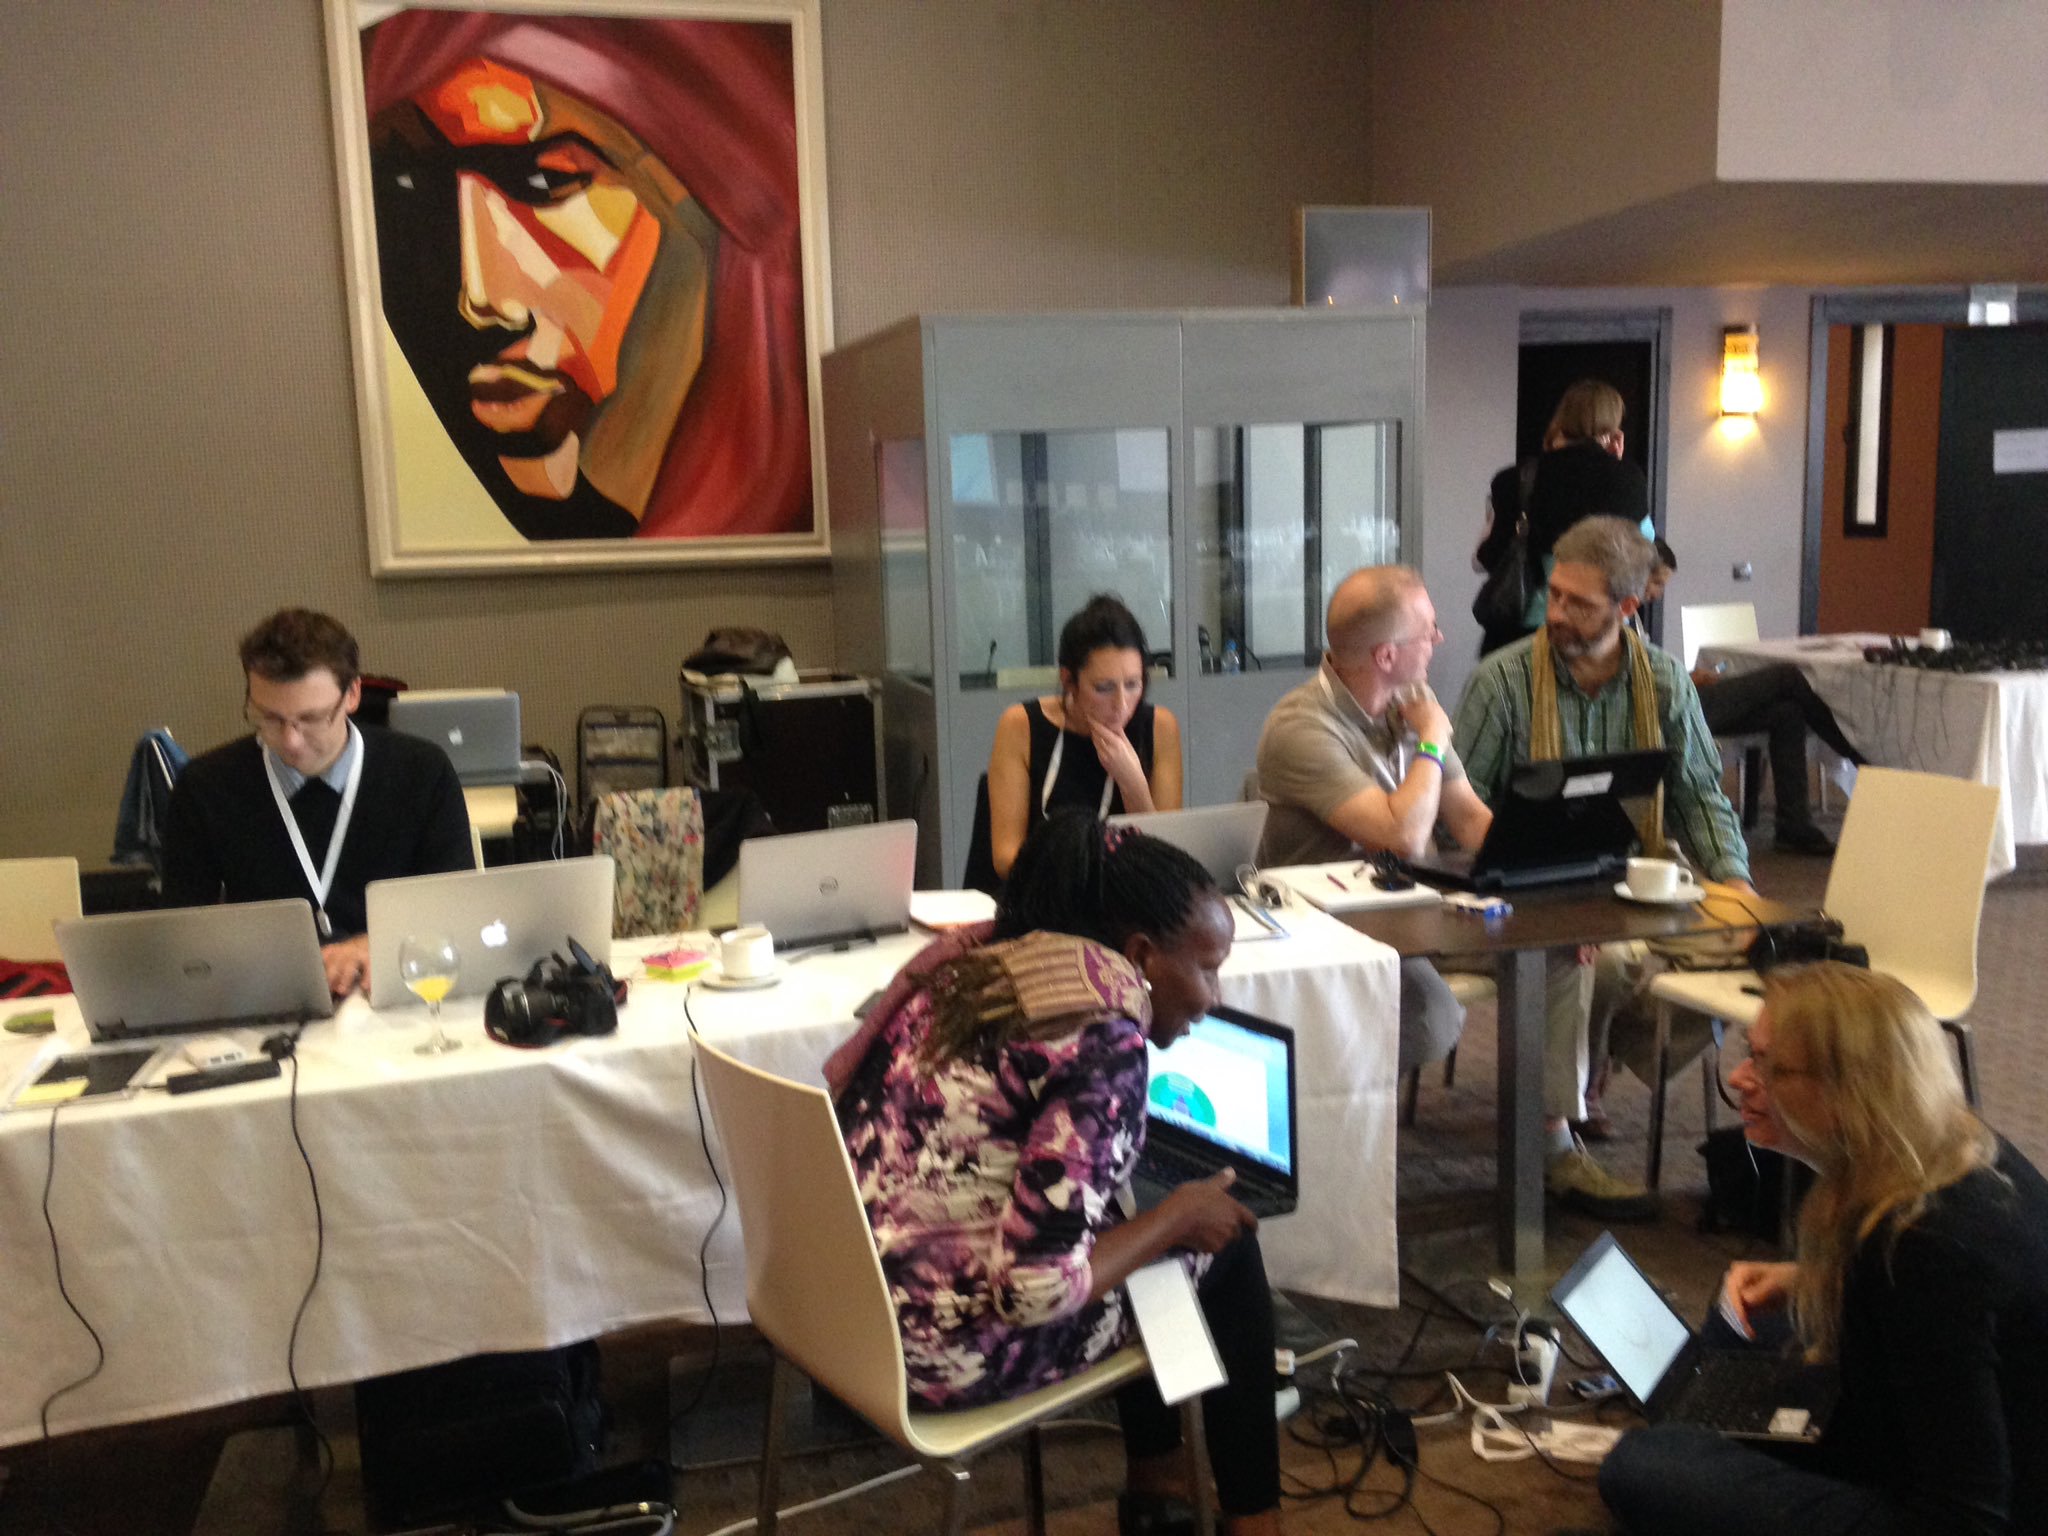 The comms hub at #DCdays hard at work. So much interesting stuff to tell everyone about and share with our audiences. https://t.co/zA4gwxPNG6